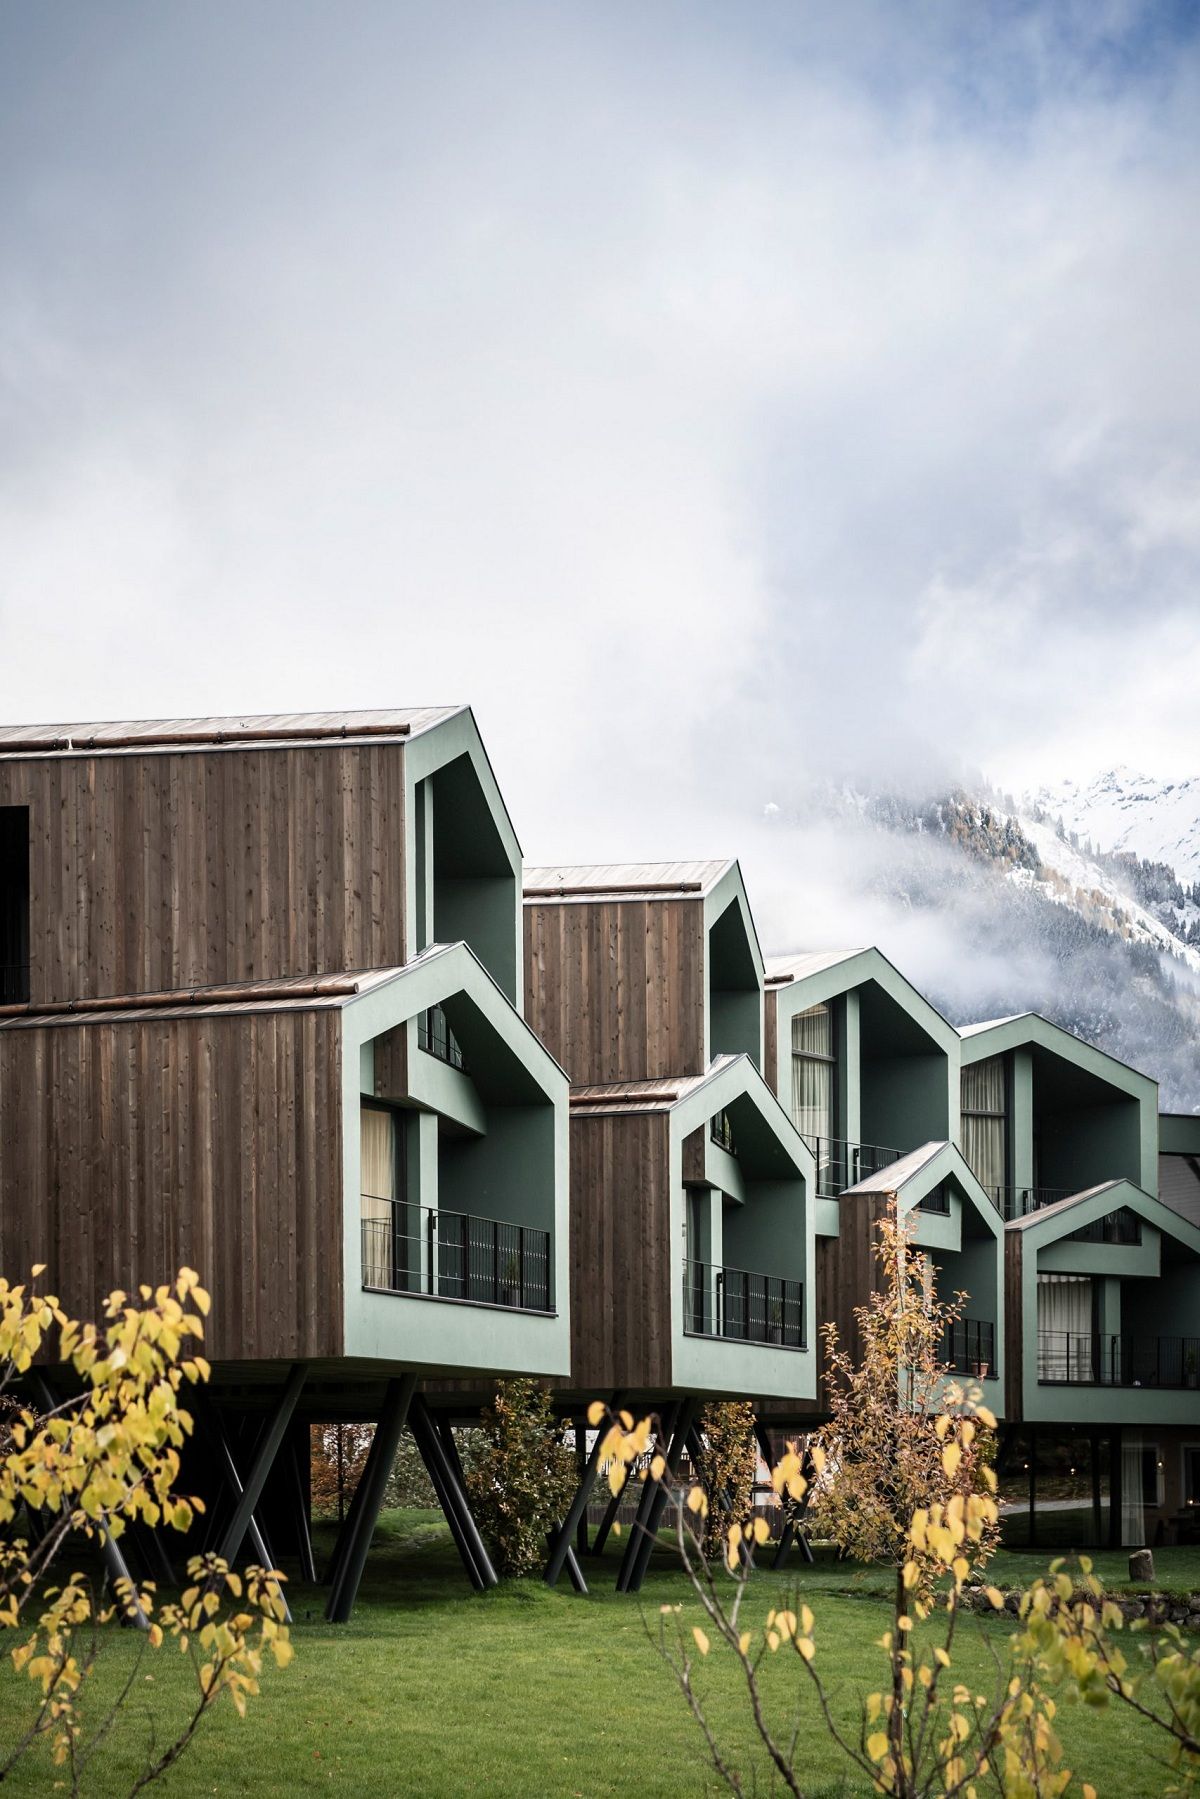 floris hotel extension noa south tyrol italy architecture dezeen 2364 col 2 scaled 1